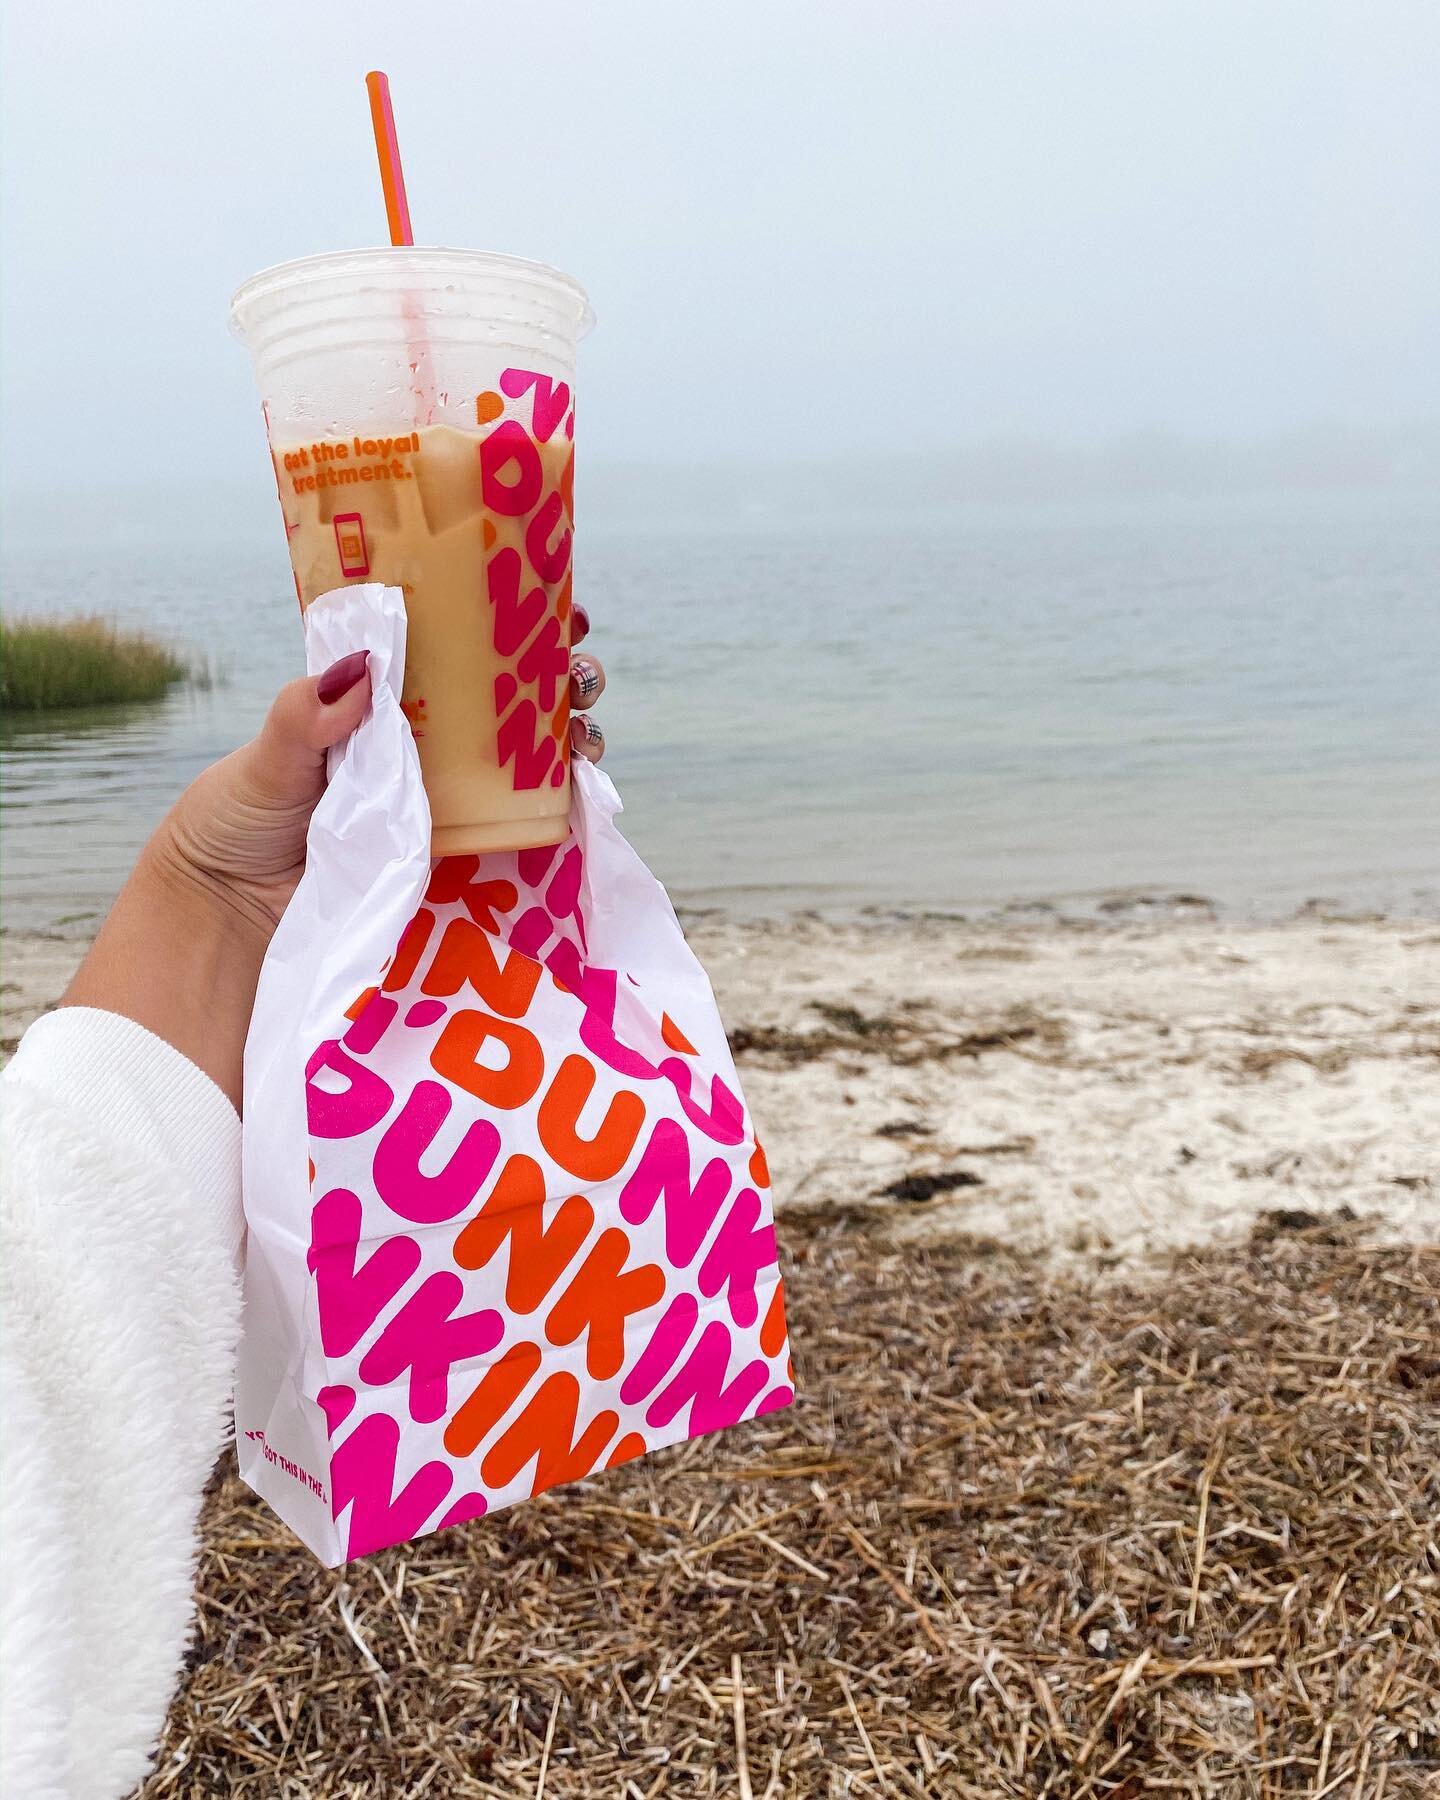 Did you know @dunkin is giving away free coffee today in honor of National Coffee Day? YEP. So naturally, I had to partake.